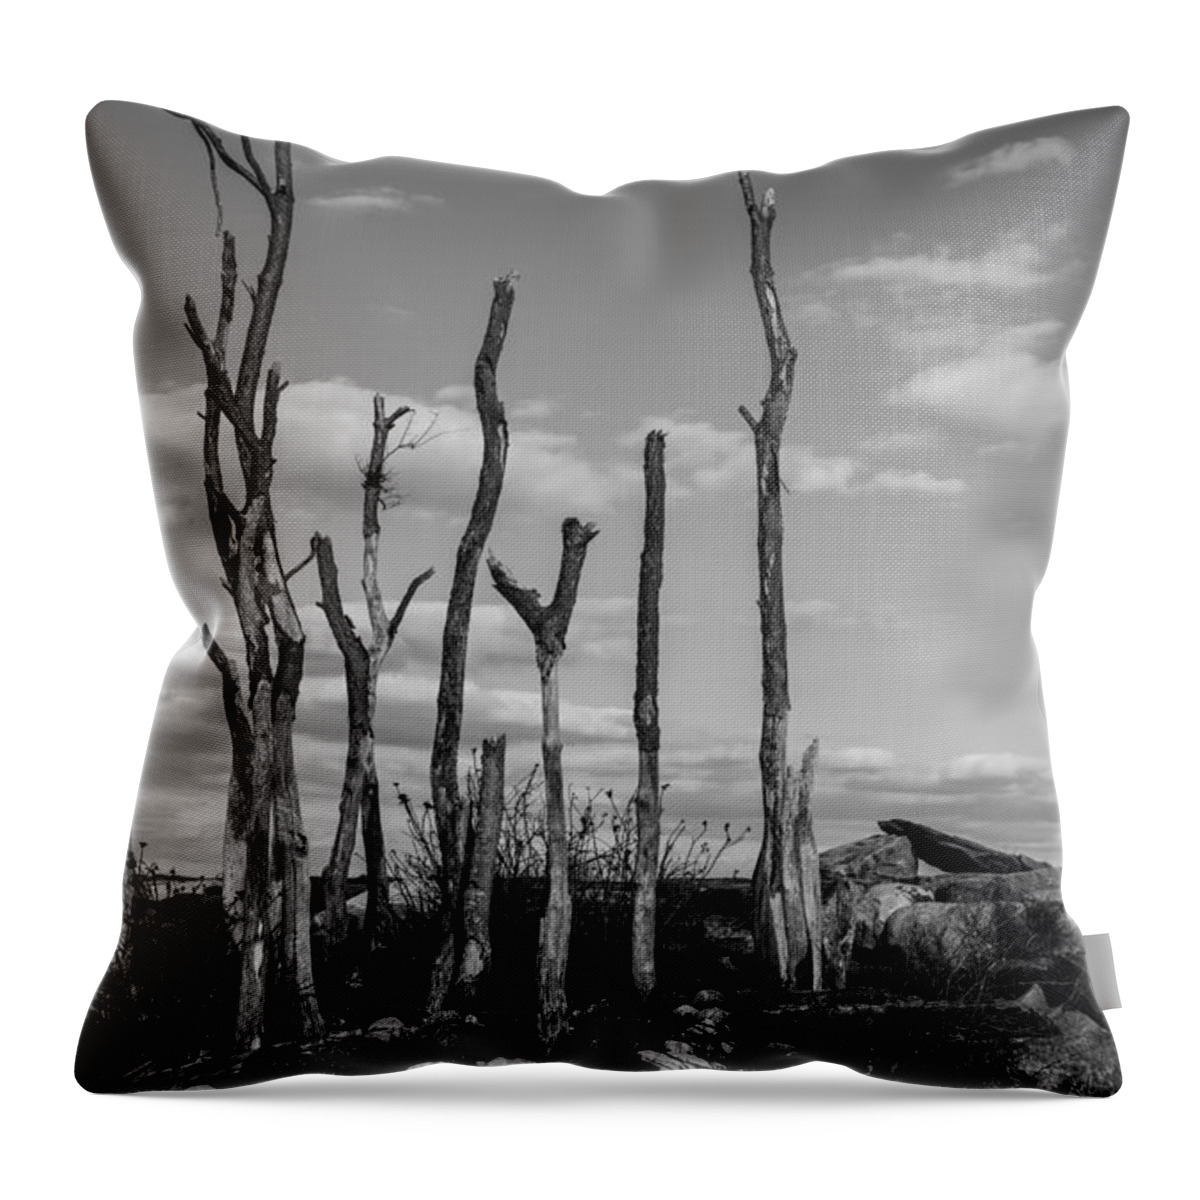 Winter Bare Throw Pillow featuring the photograph Winter Bare by Karol Livote